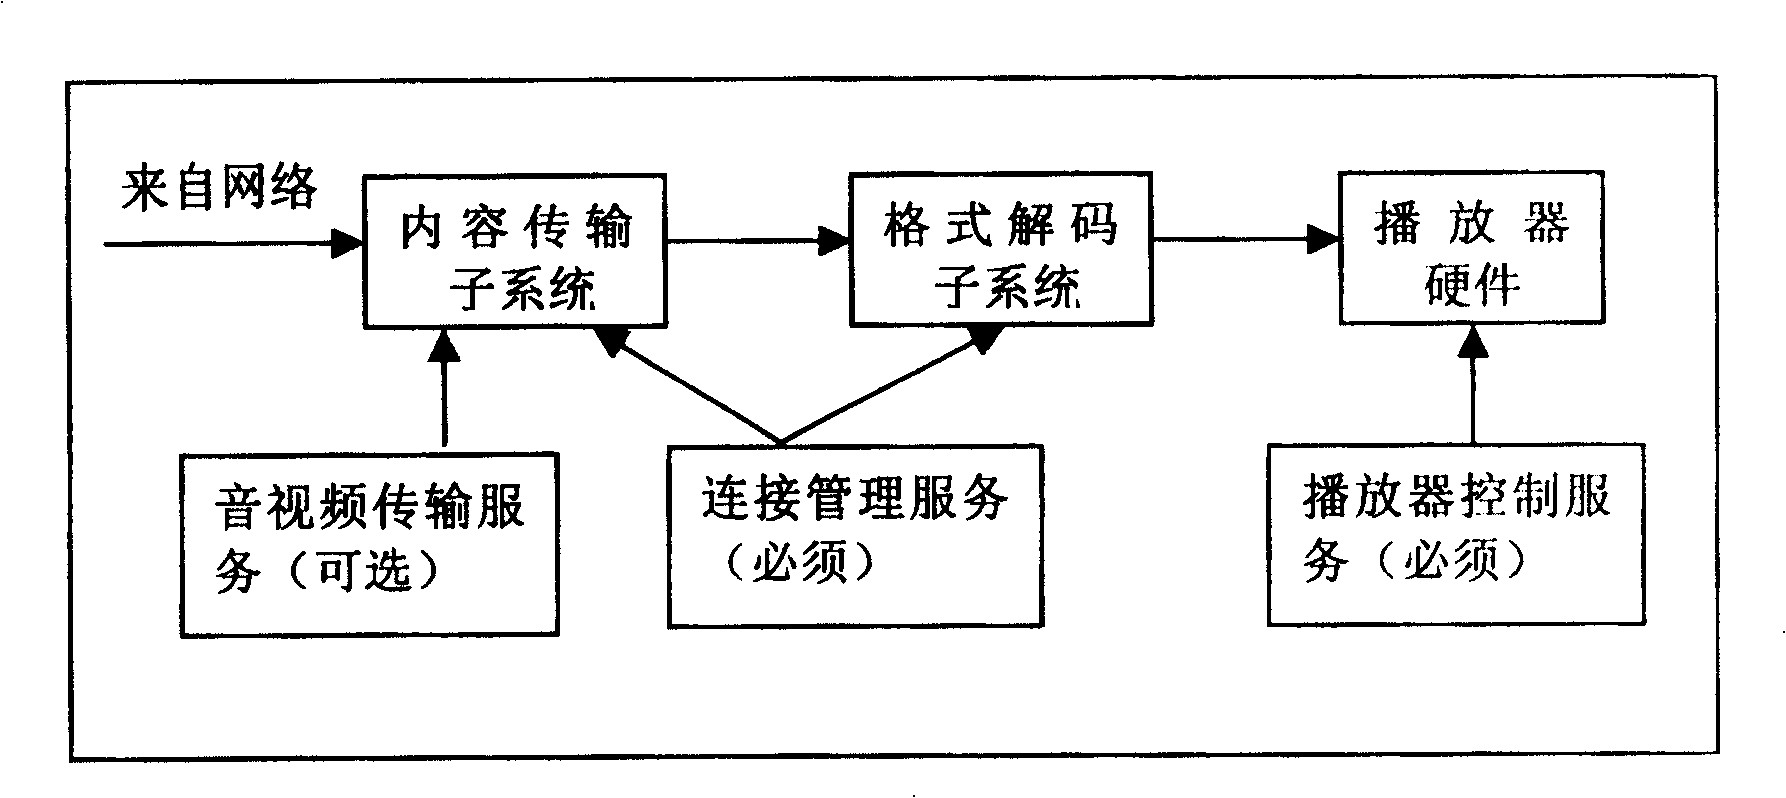 Method for realizing wireless accessing-internet of TV set bused on flash connection protocol